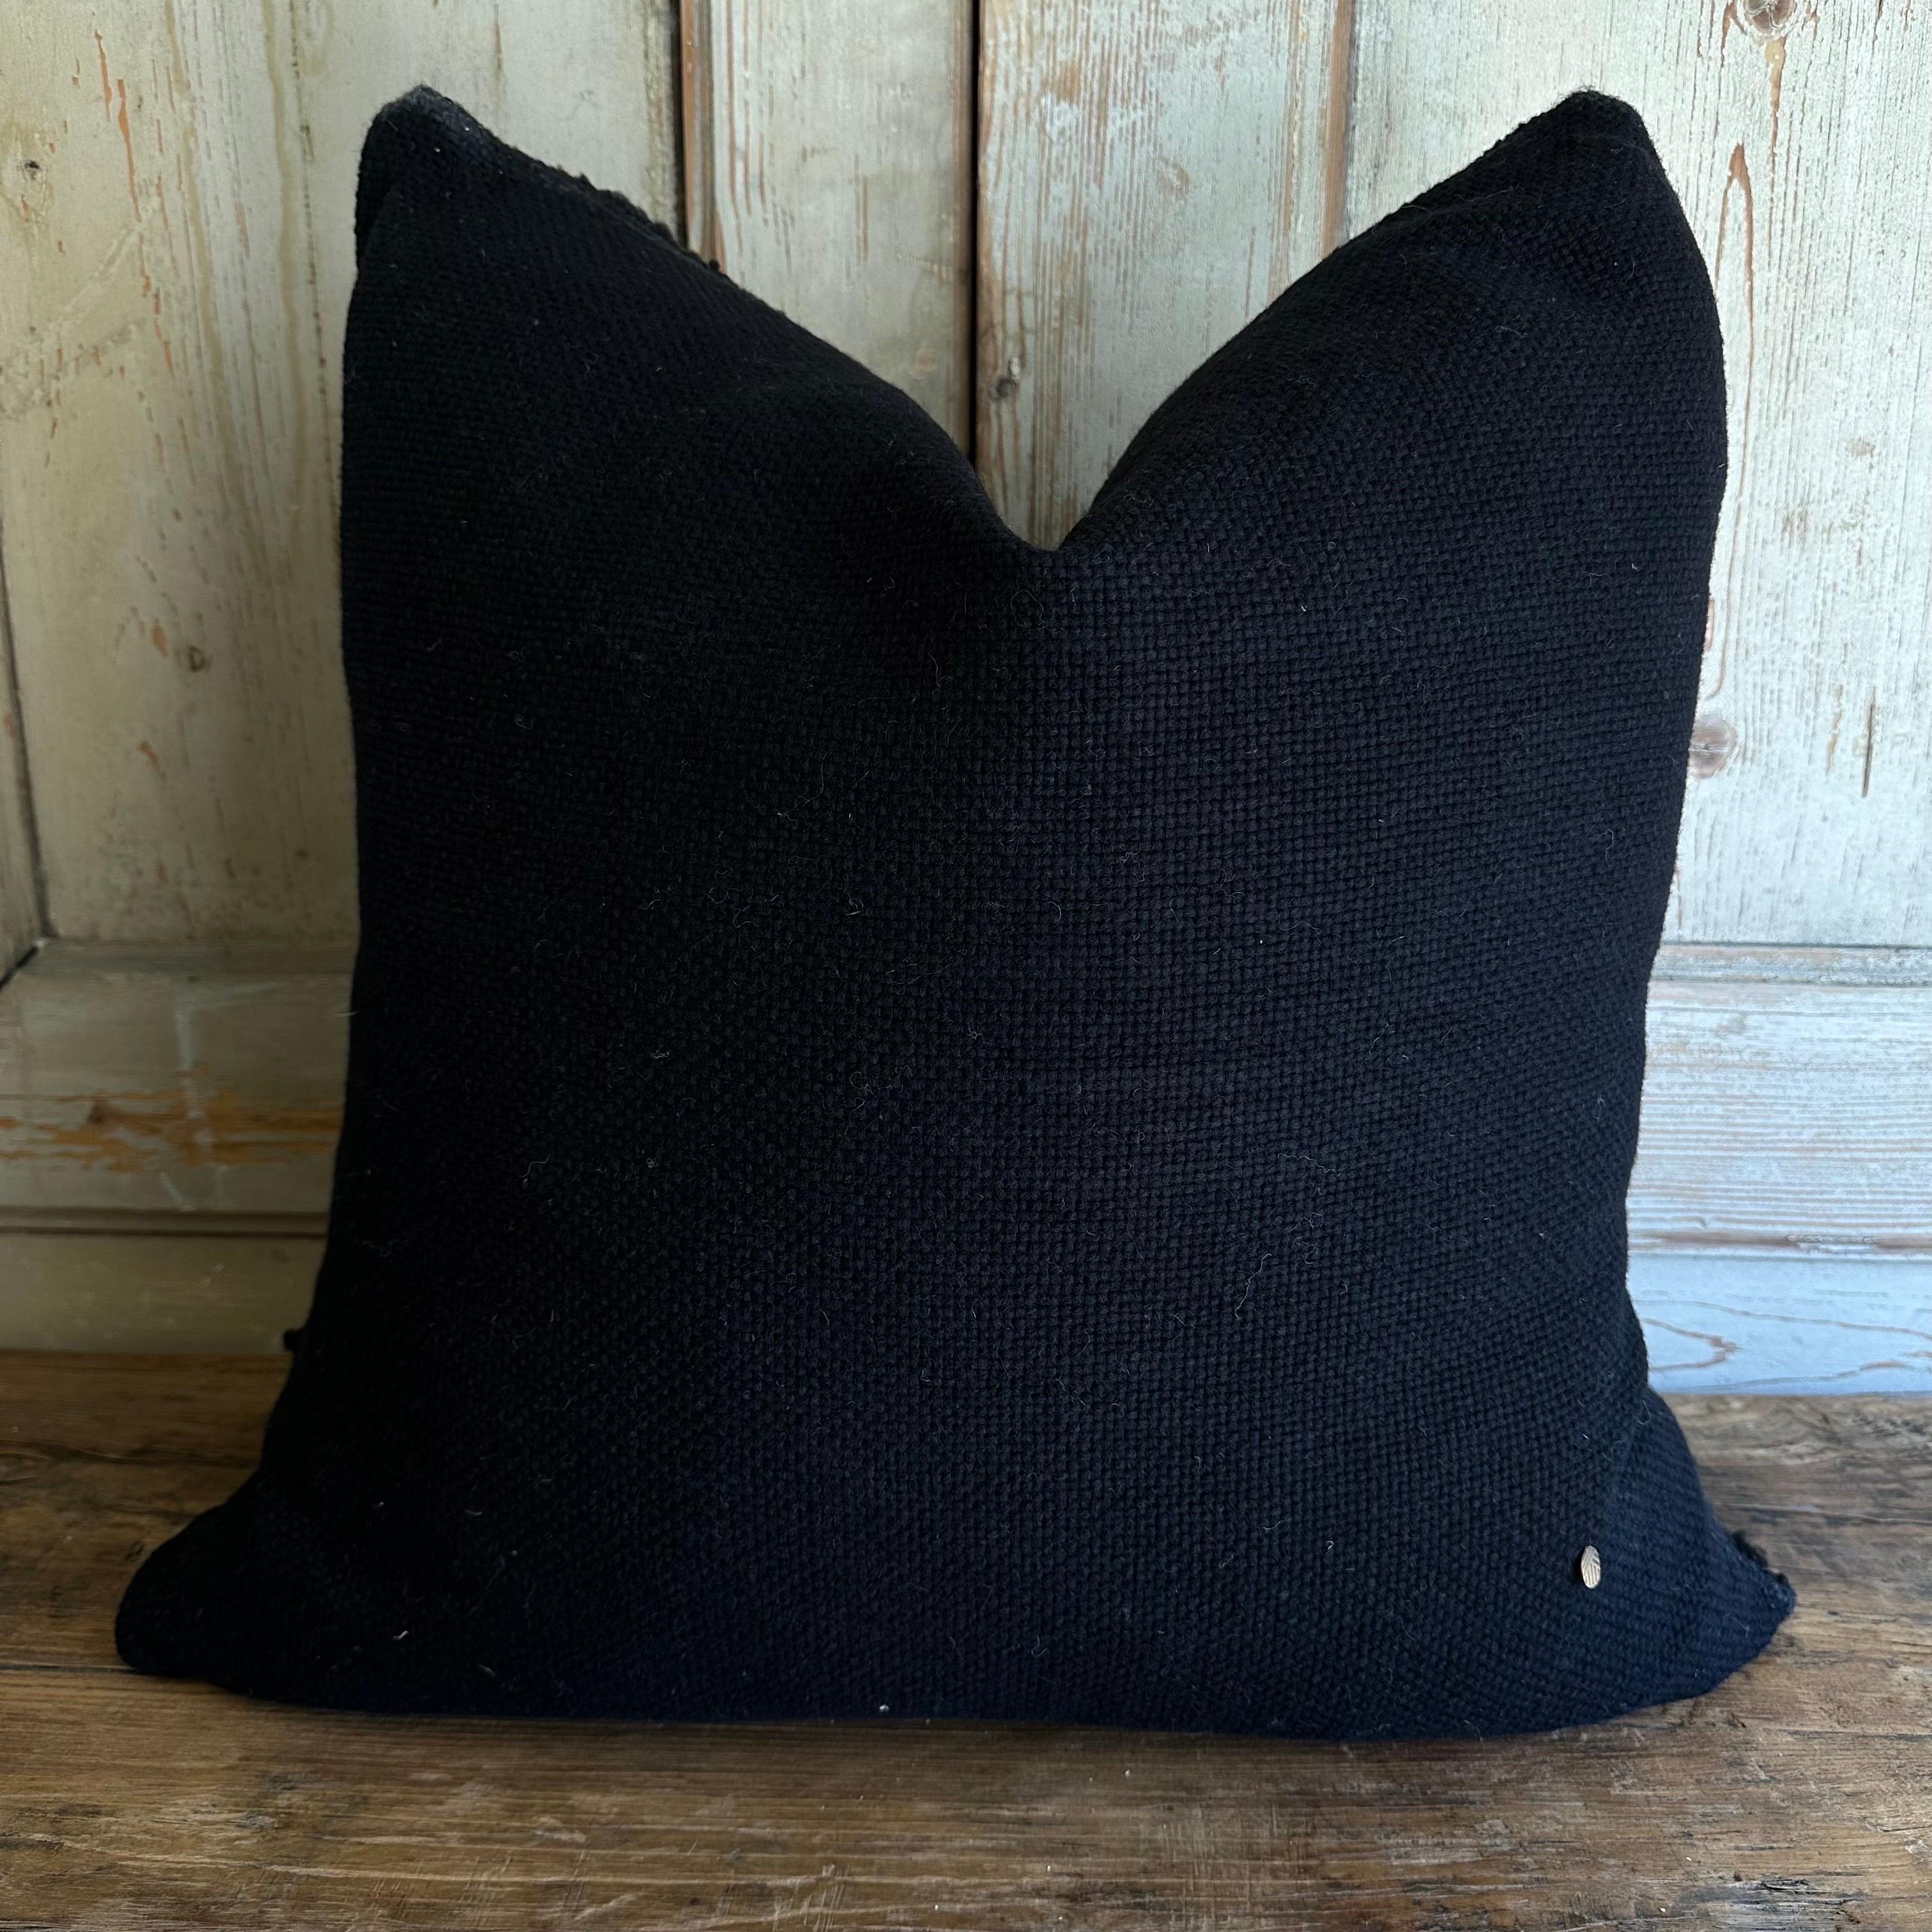 Villa hand made wool accent pillow with down insert.
All of our products are commissioned and handmade by the craftswomen of Chiloé. The textiles are made with 100% wool from ’Chilota’ sheep, that are born and raised on the island.?The process by